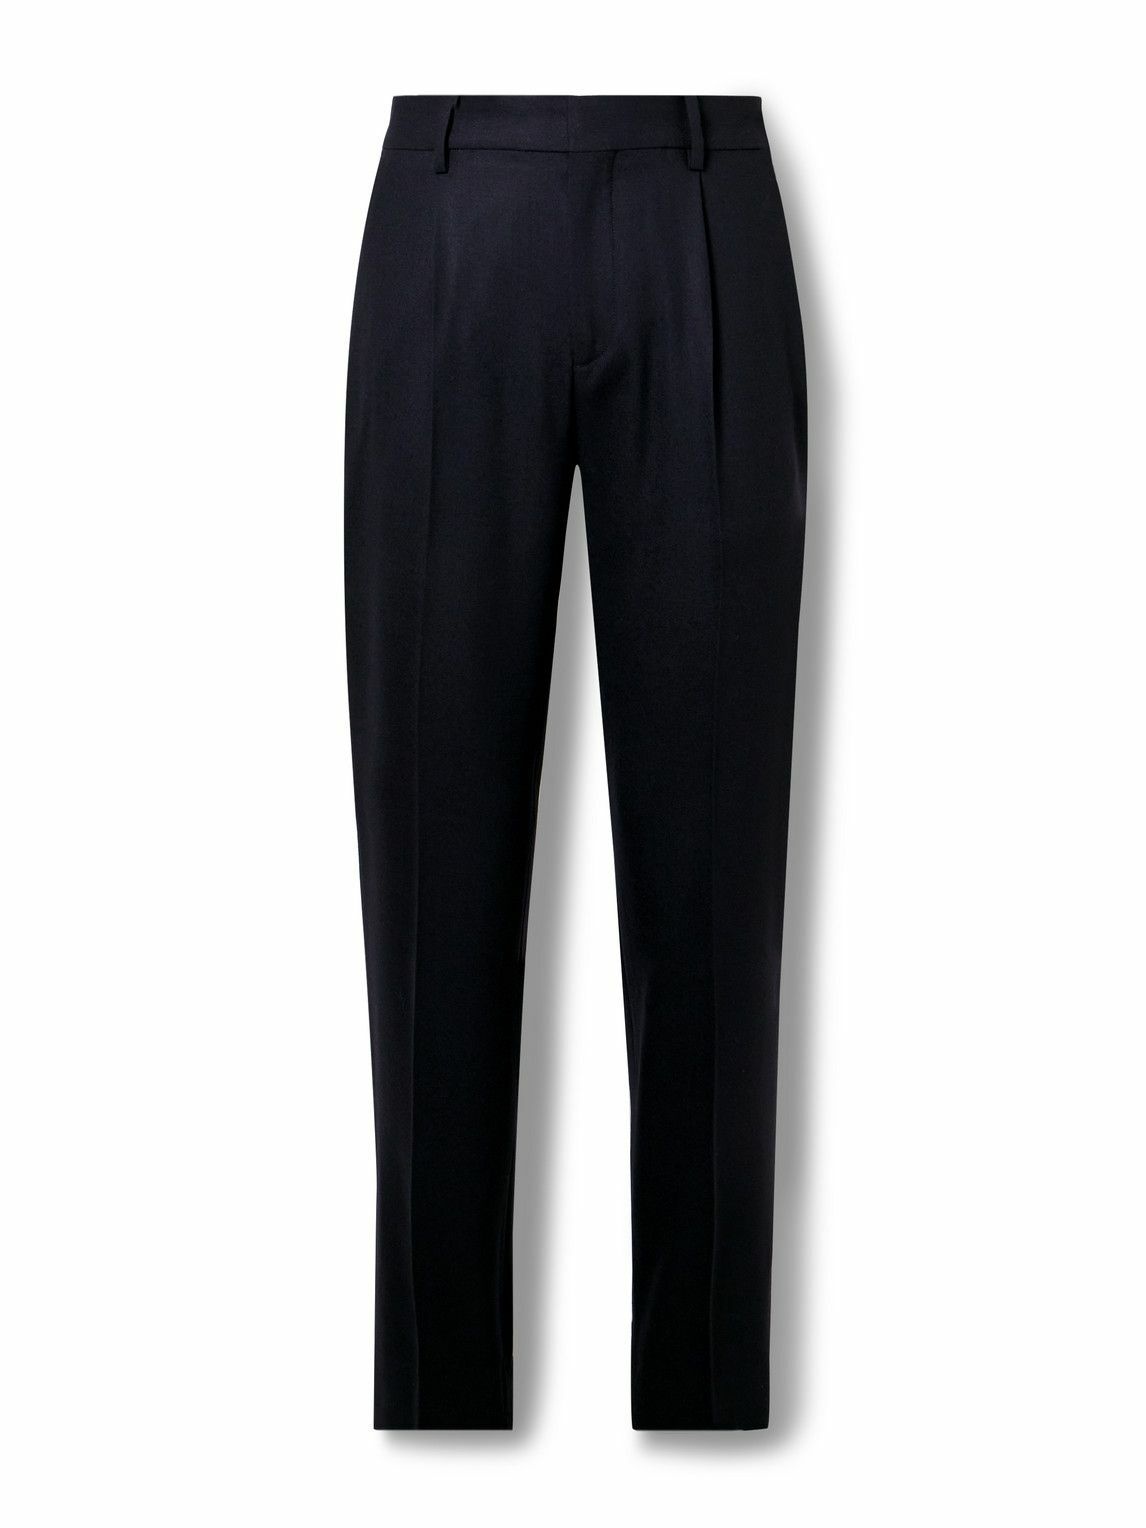 Barena - Gazara Tapered Pleated Cotton-Blend Suit Trousers - Blue Barena